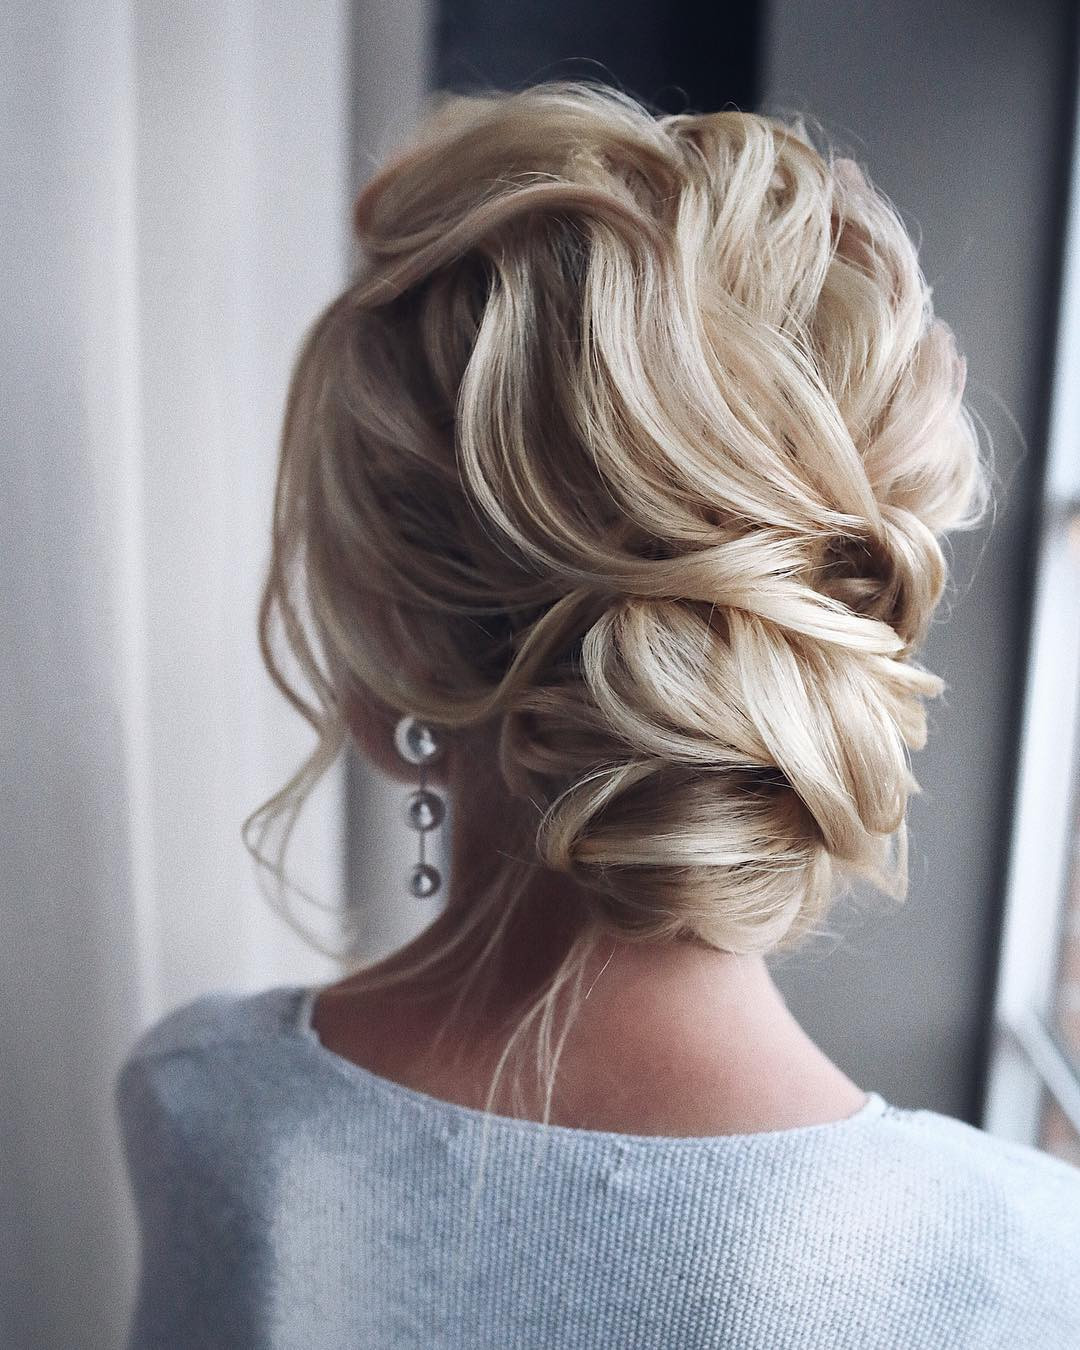 Meduim Prom Hairstyles
 10 Updos for Medium Length Hair Prom & Home ing